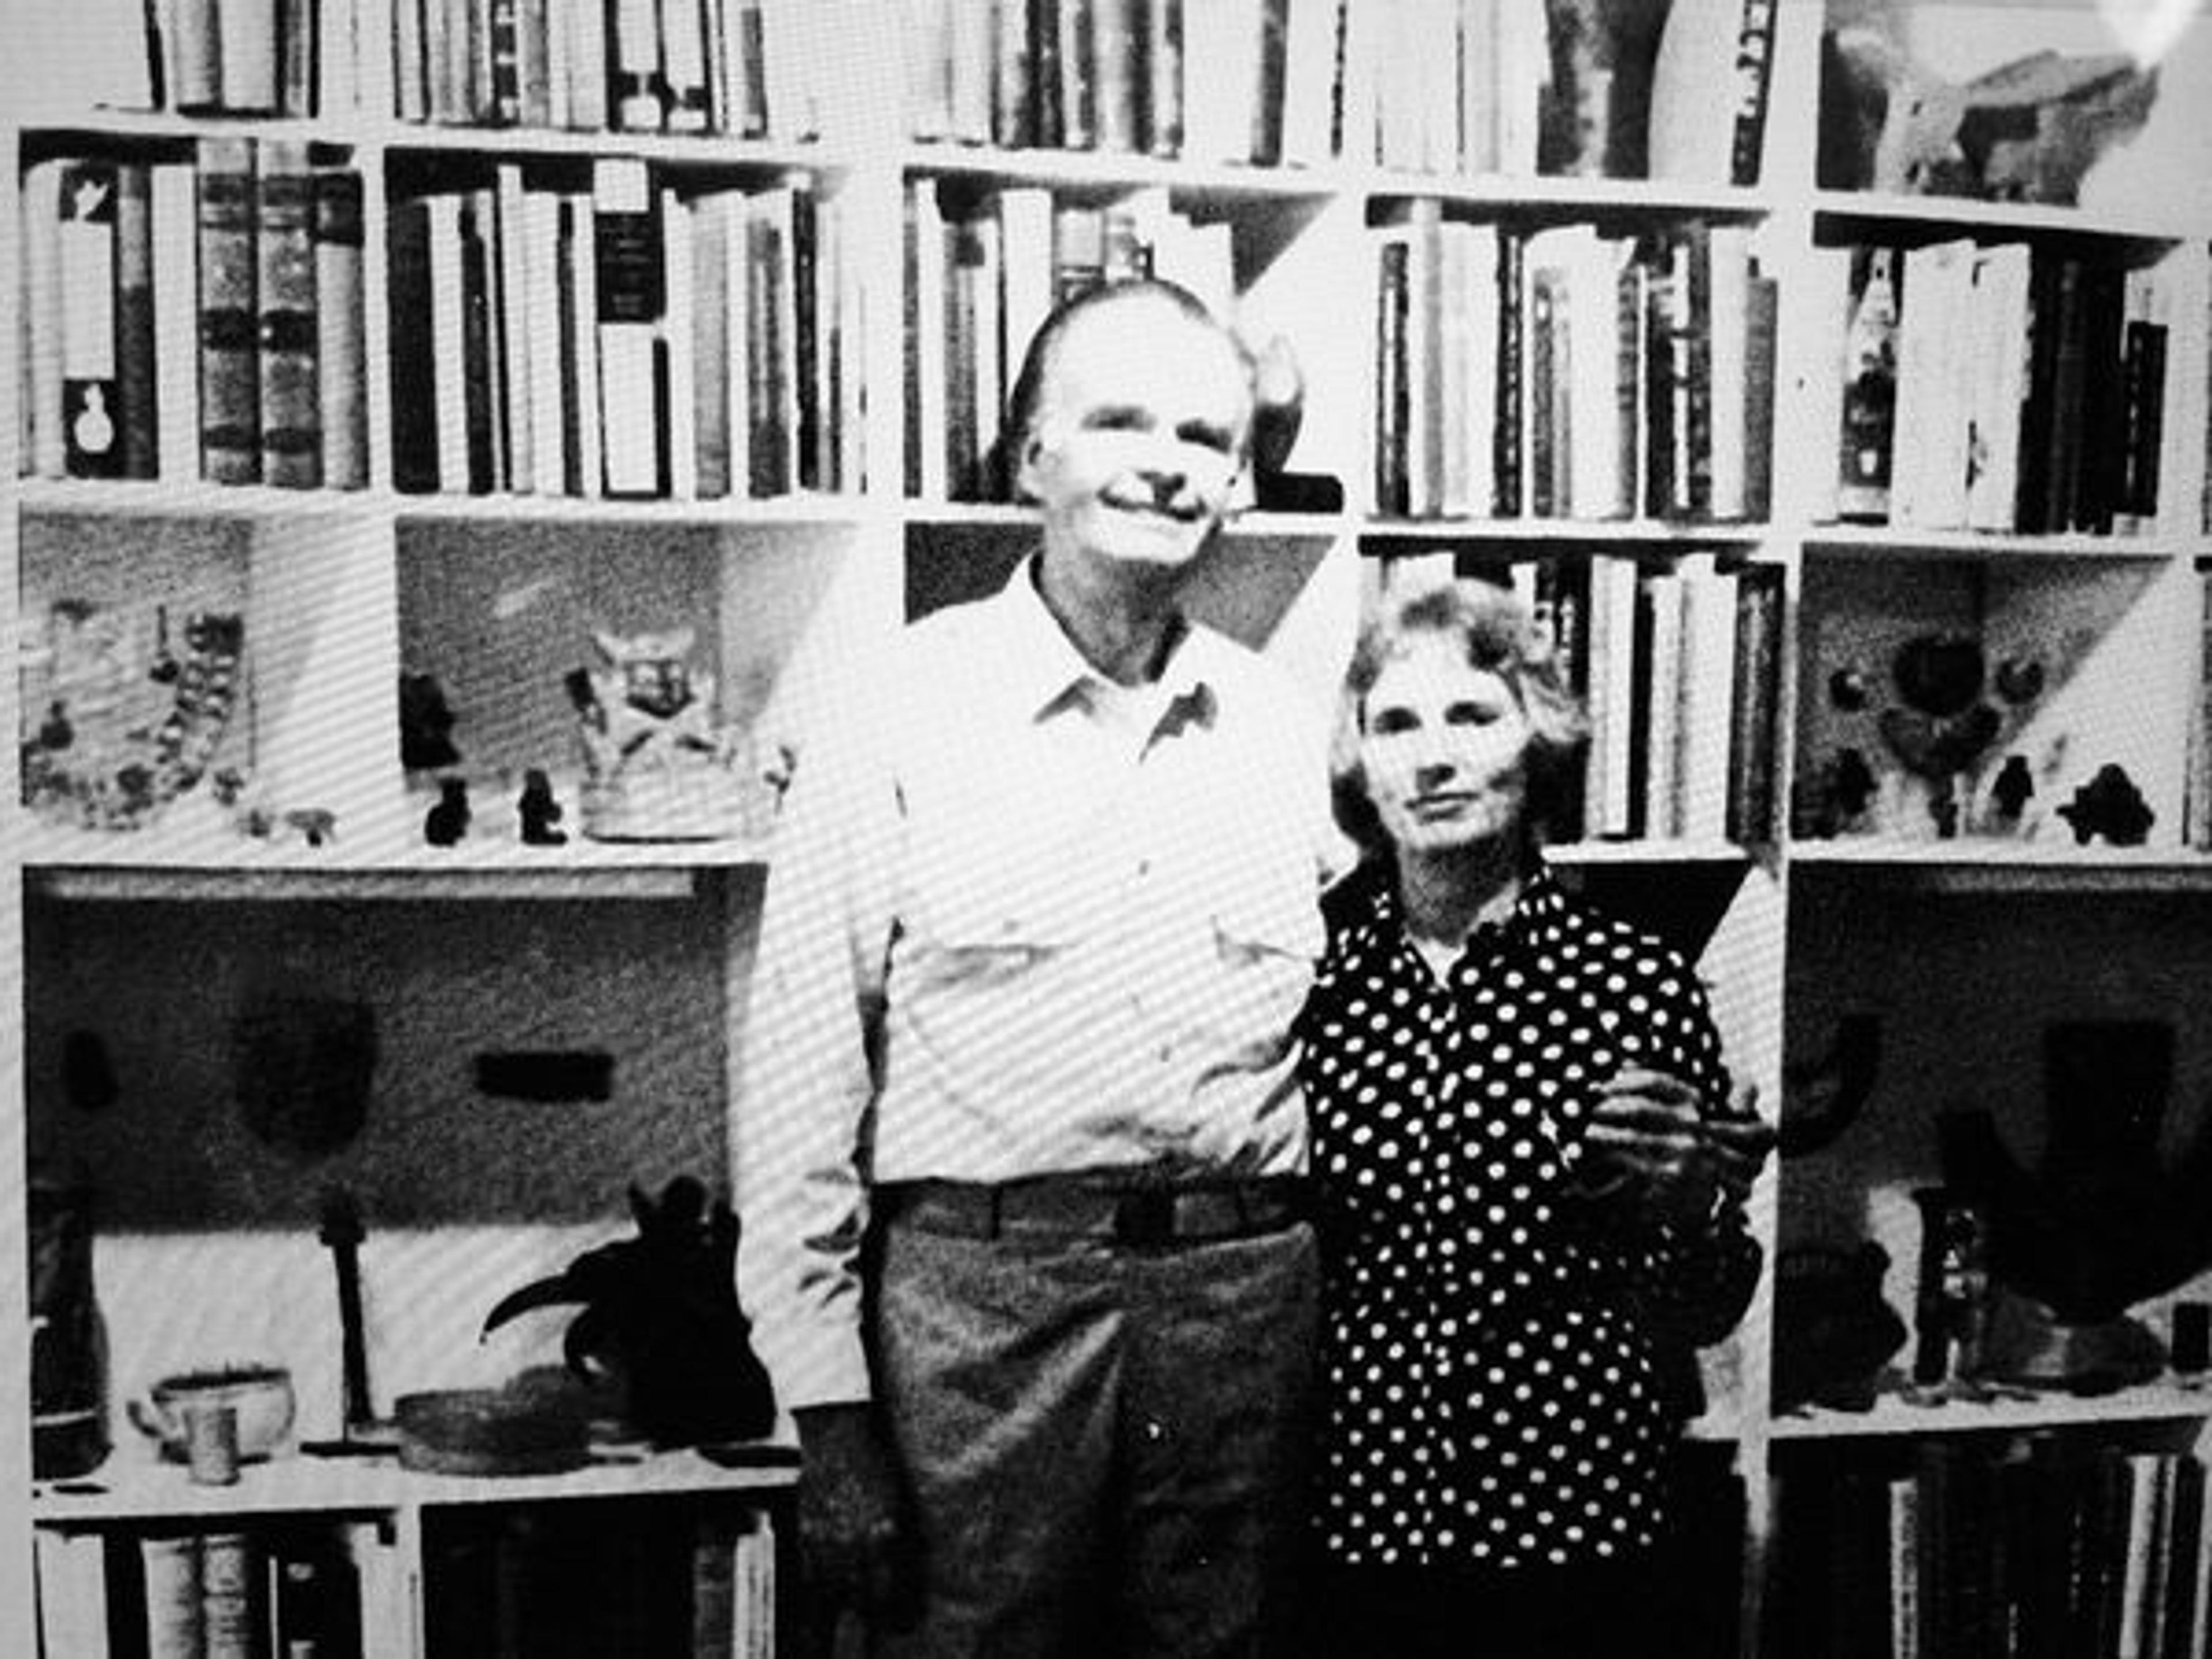 Laurence and Cora Witten in 1984, shortly before his collection traveled to the National Music Museum